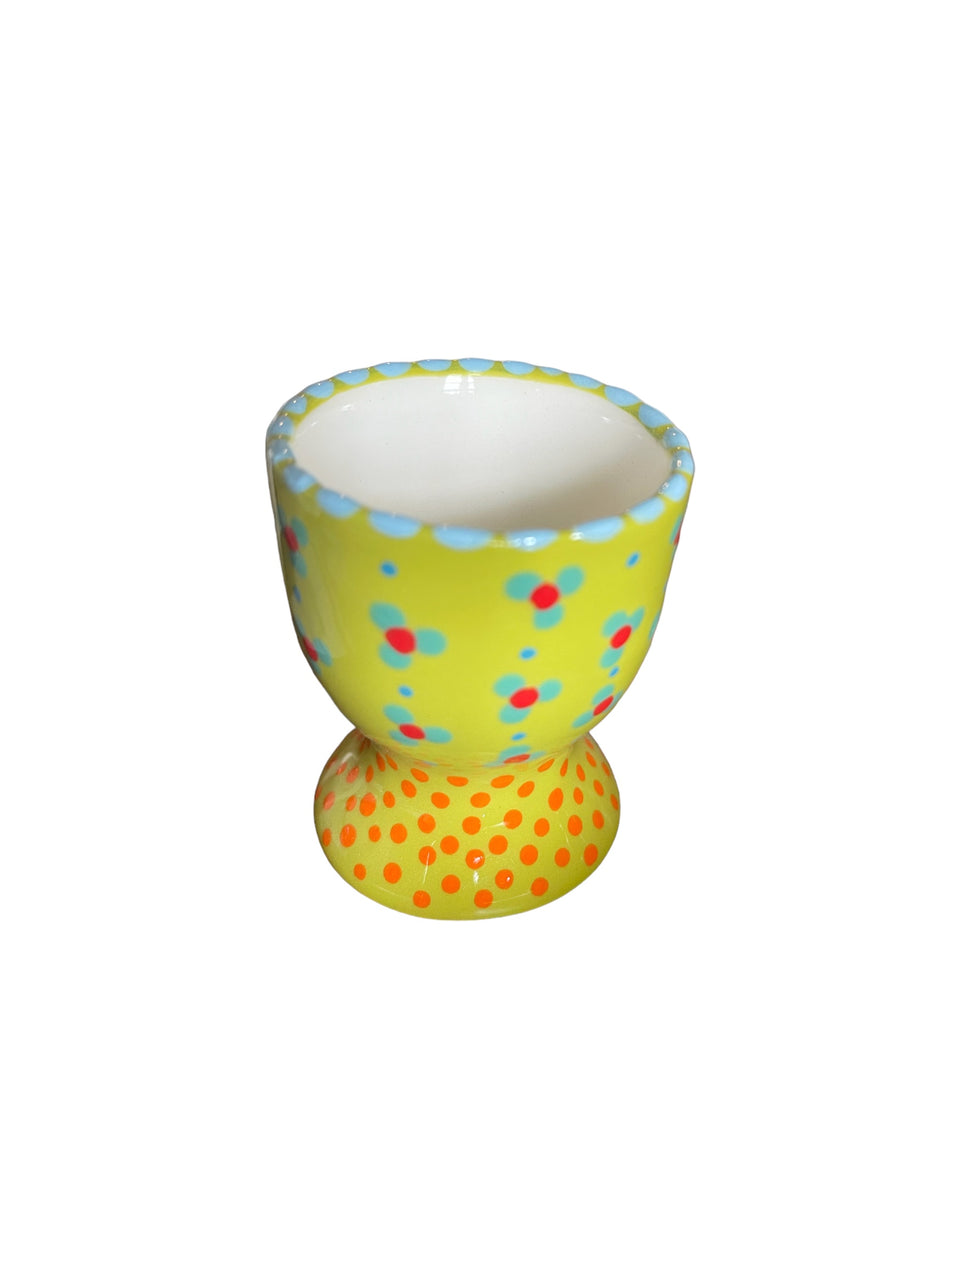 Potters Classic Egg Cup